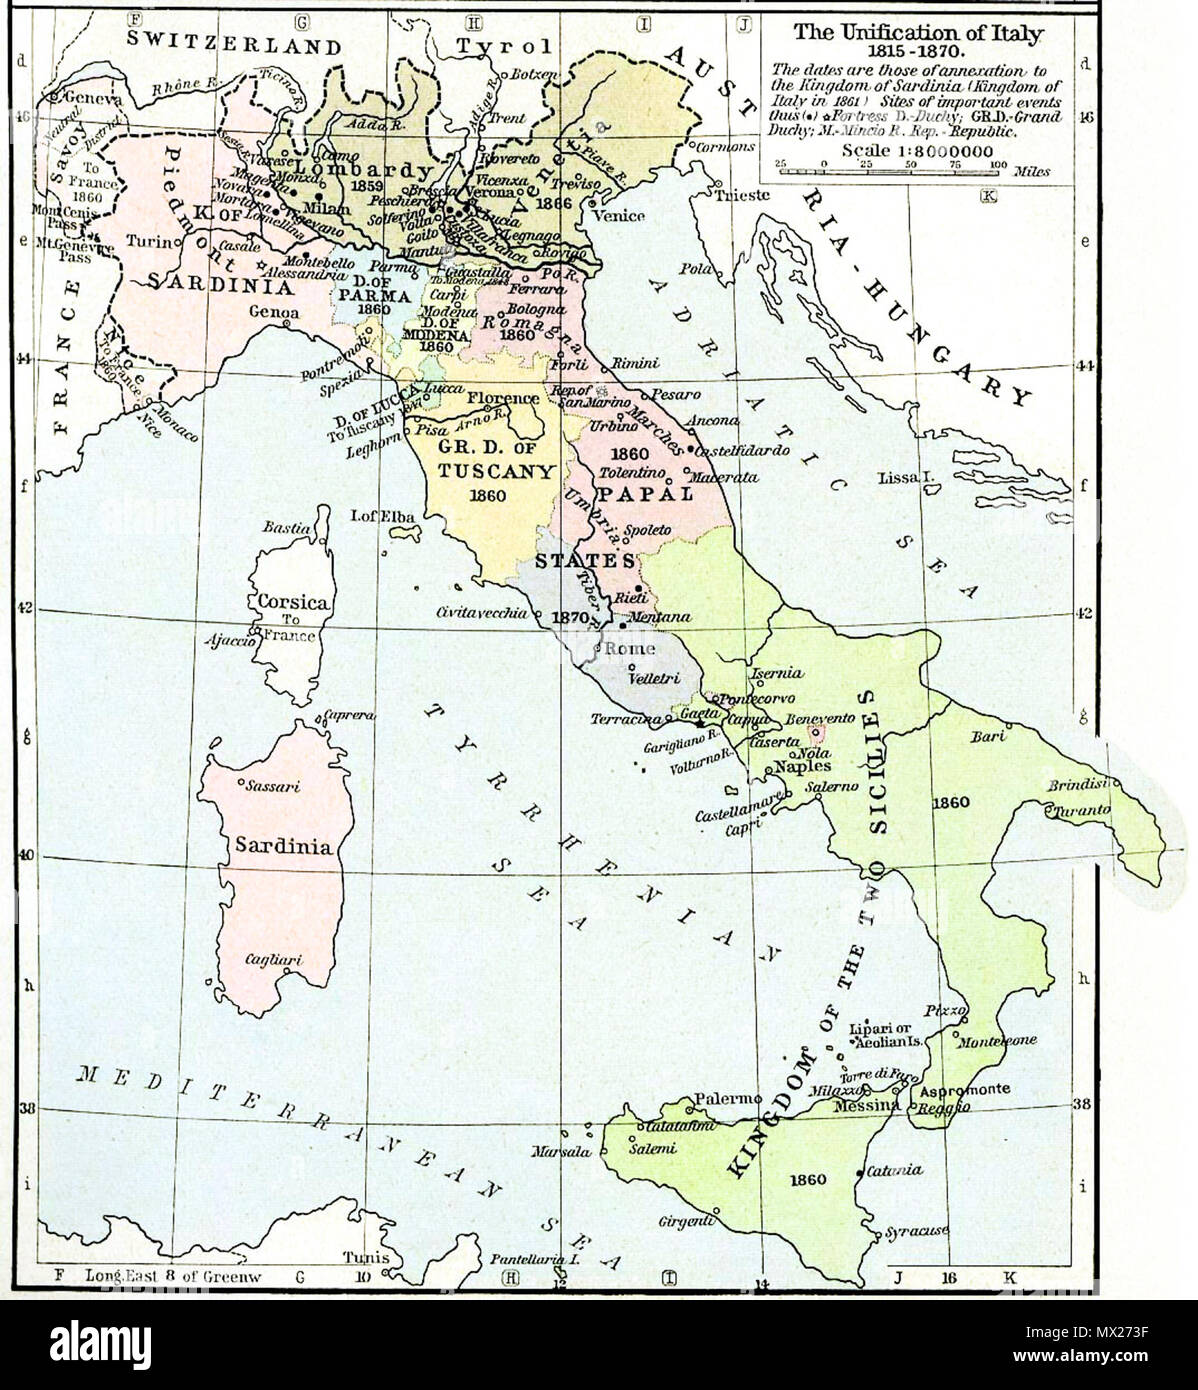 . English: Map of unification of Italy, 1815-70 . 17 December 2005 (original upload date). The original uploader was Känsterle at Dutch Wikipedia 302 Italy unification 1815 1870 Stock Photo